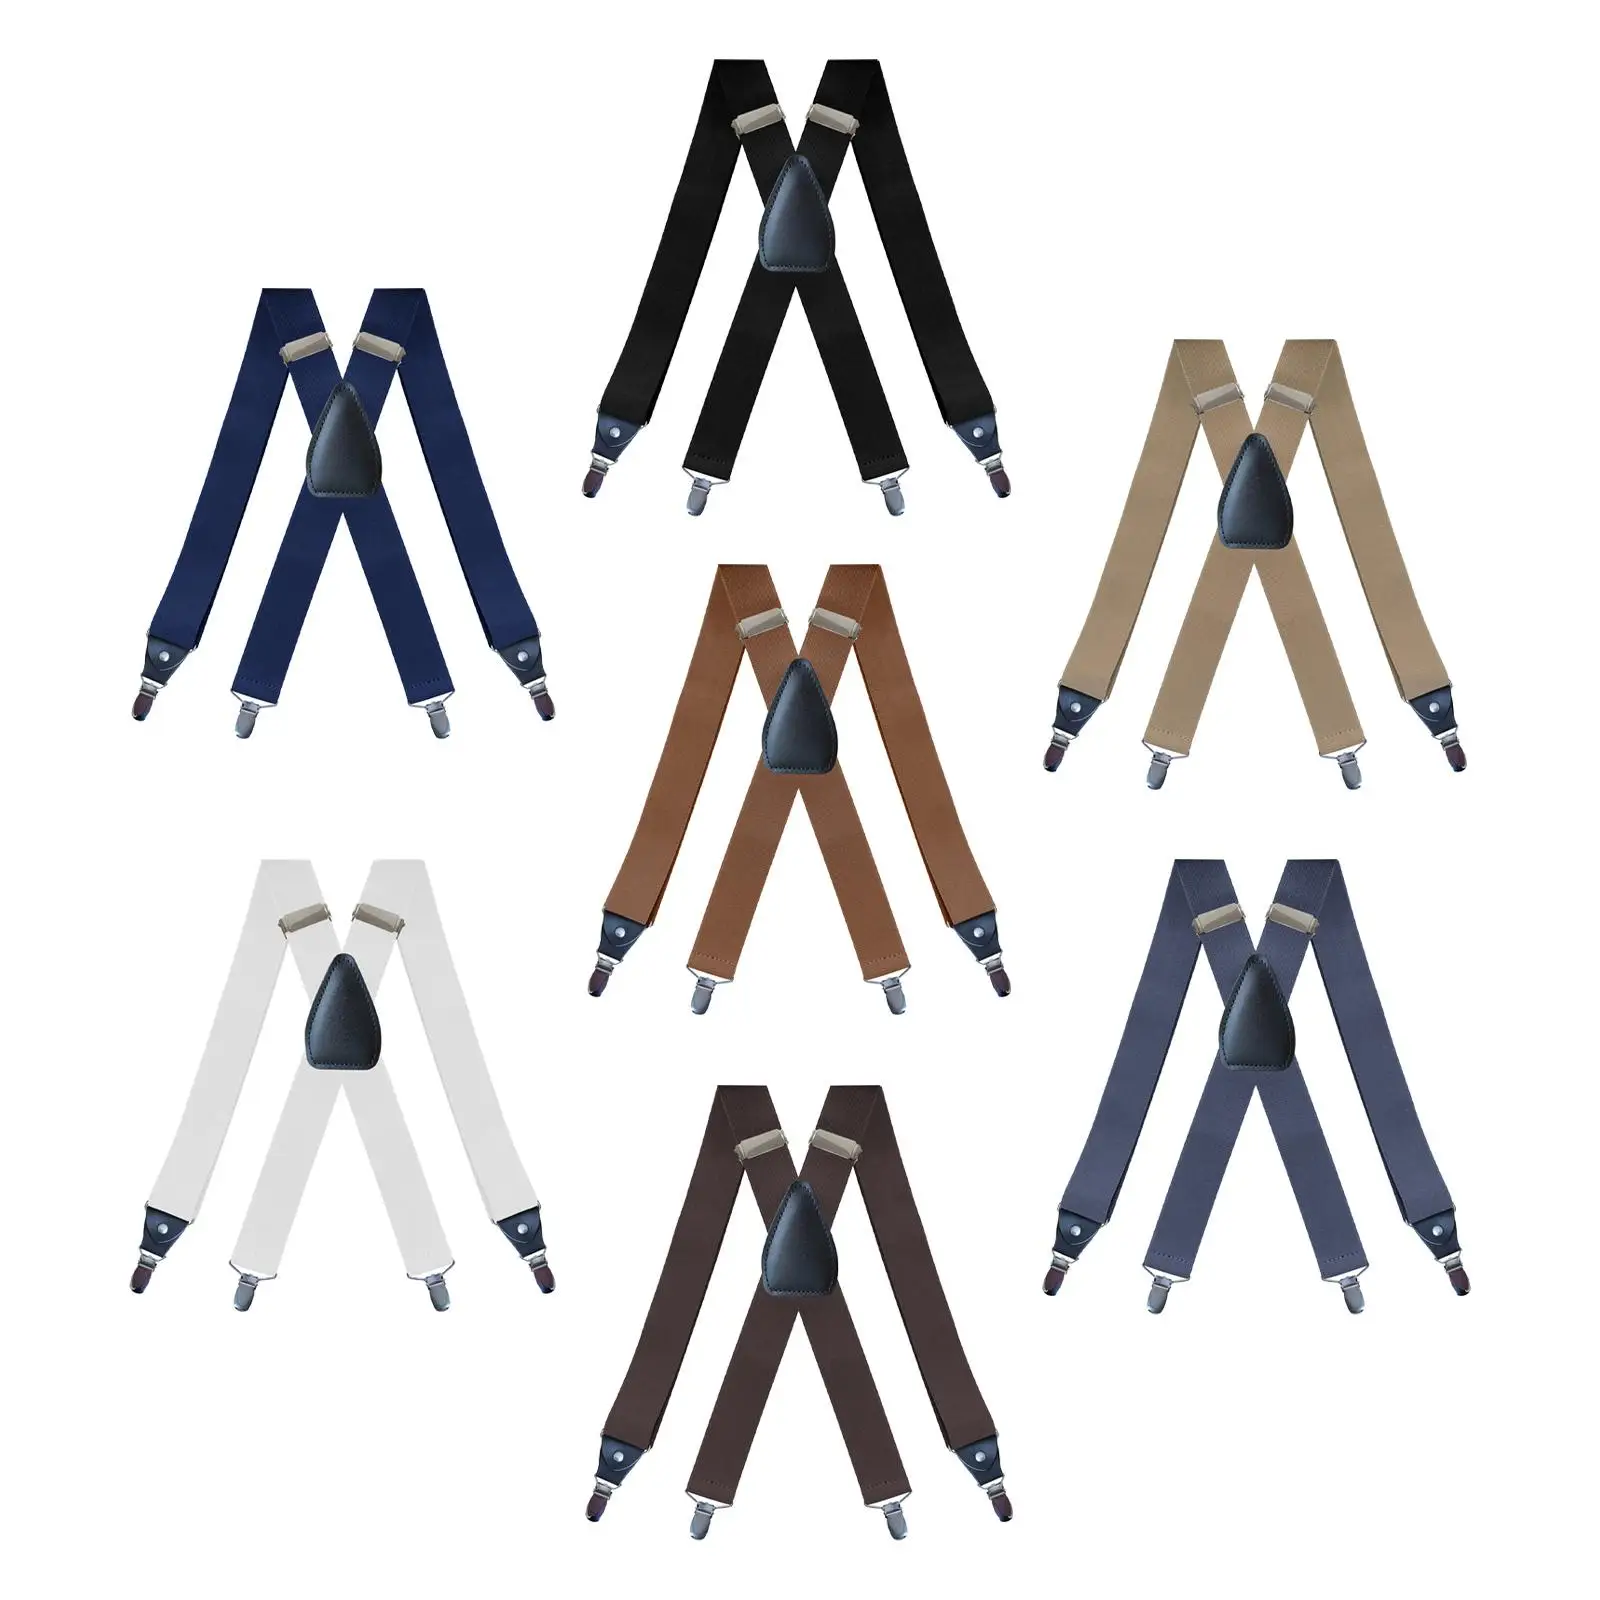 Durable Men`s Suspenders with 4 Sturdy Clips for Work and Casual Wear